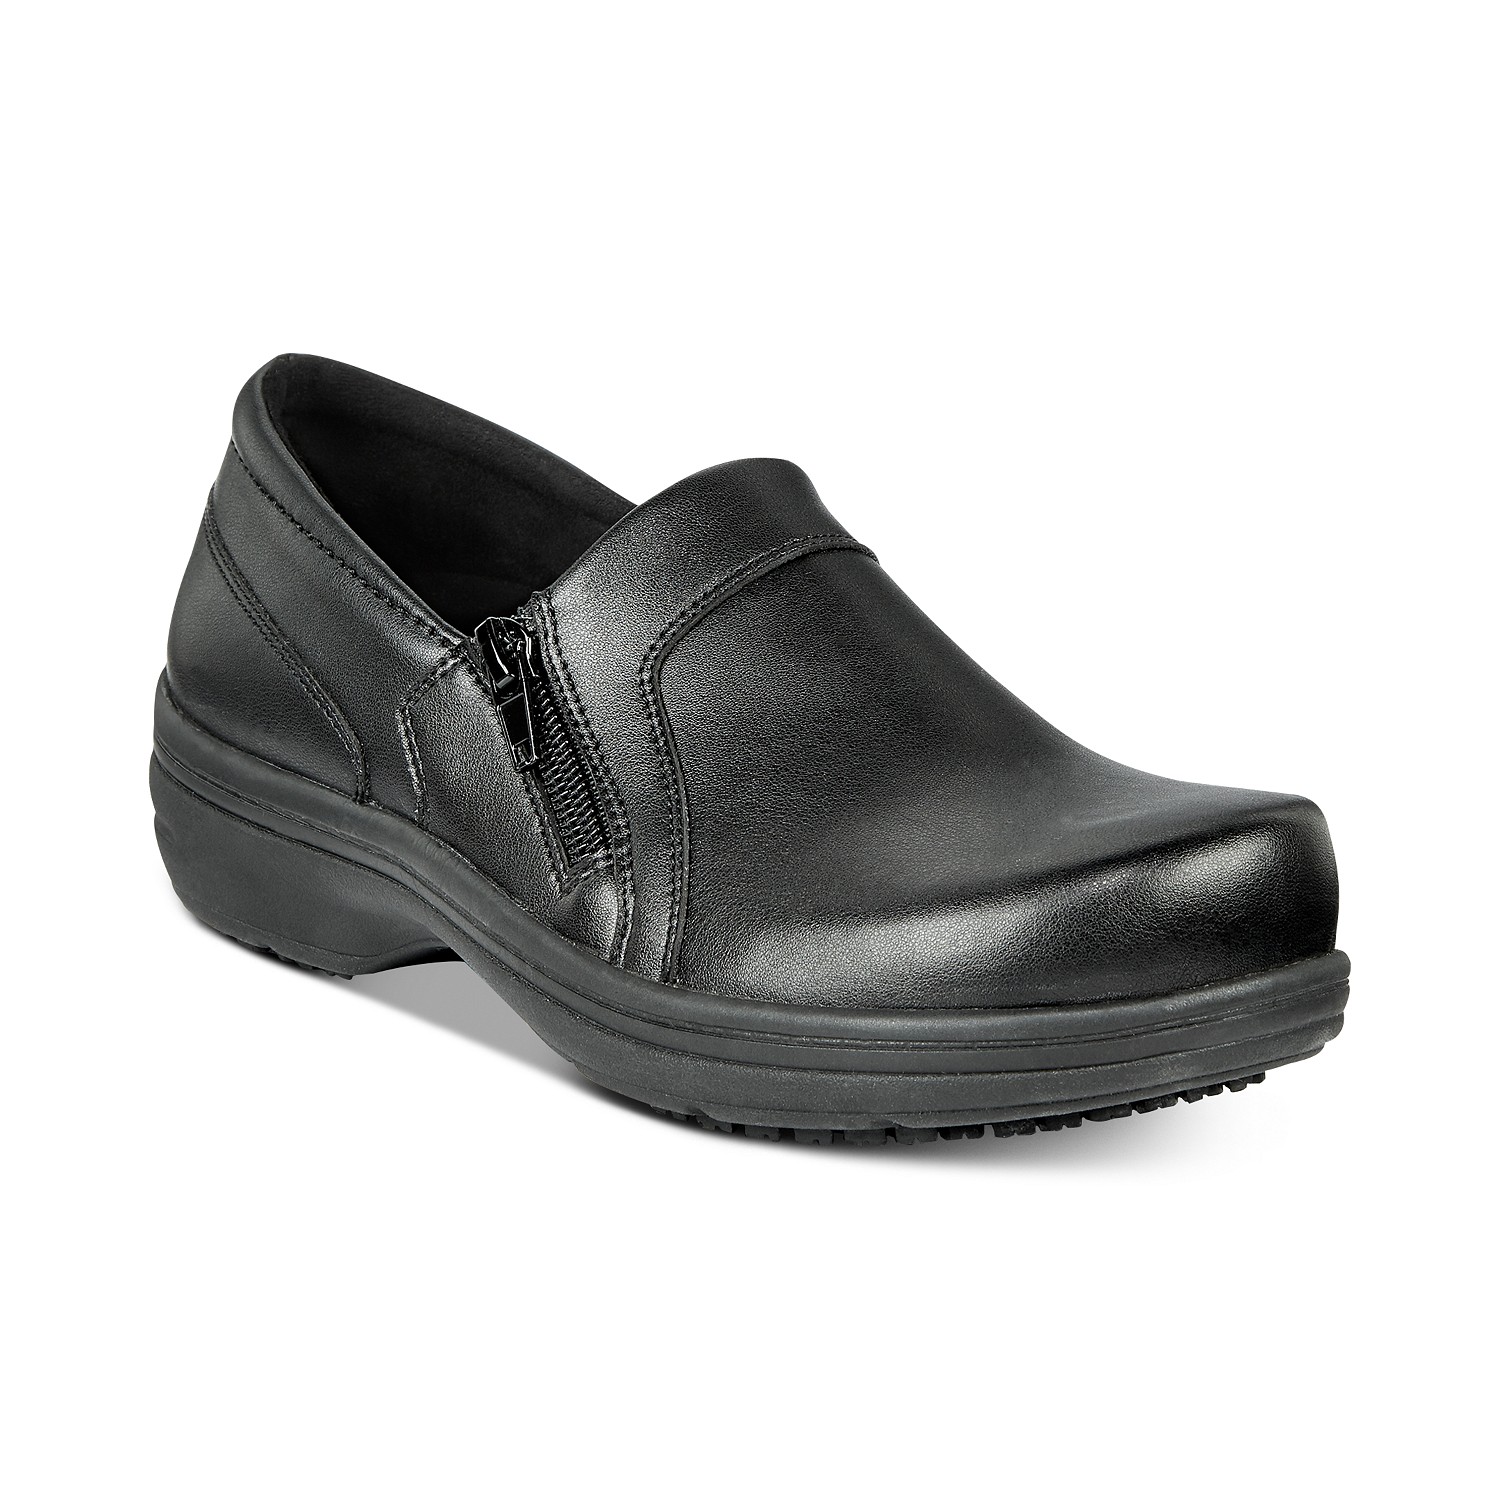 woocommerce-673321-2209615.cloudwaysapps.com-easy-works-by-easy-street-womens-black-leather-bentley-slip-resistant-clogs